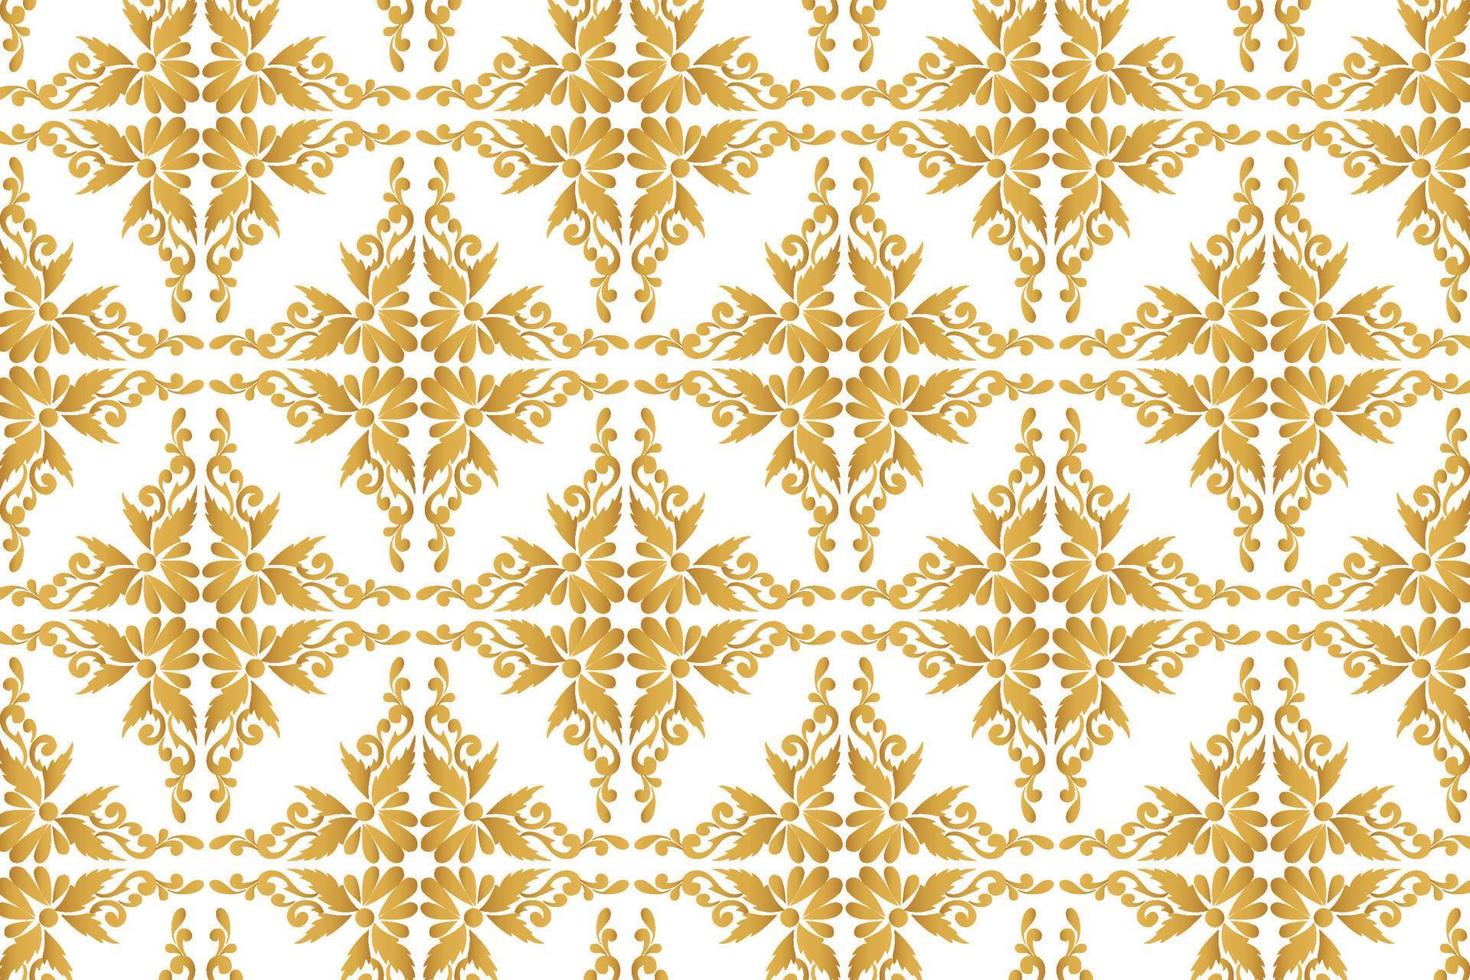 Abstract decorative golden floral pattern background vector